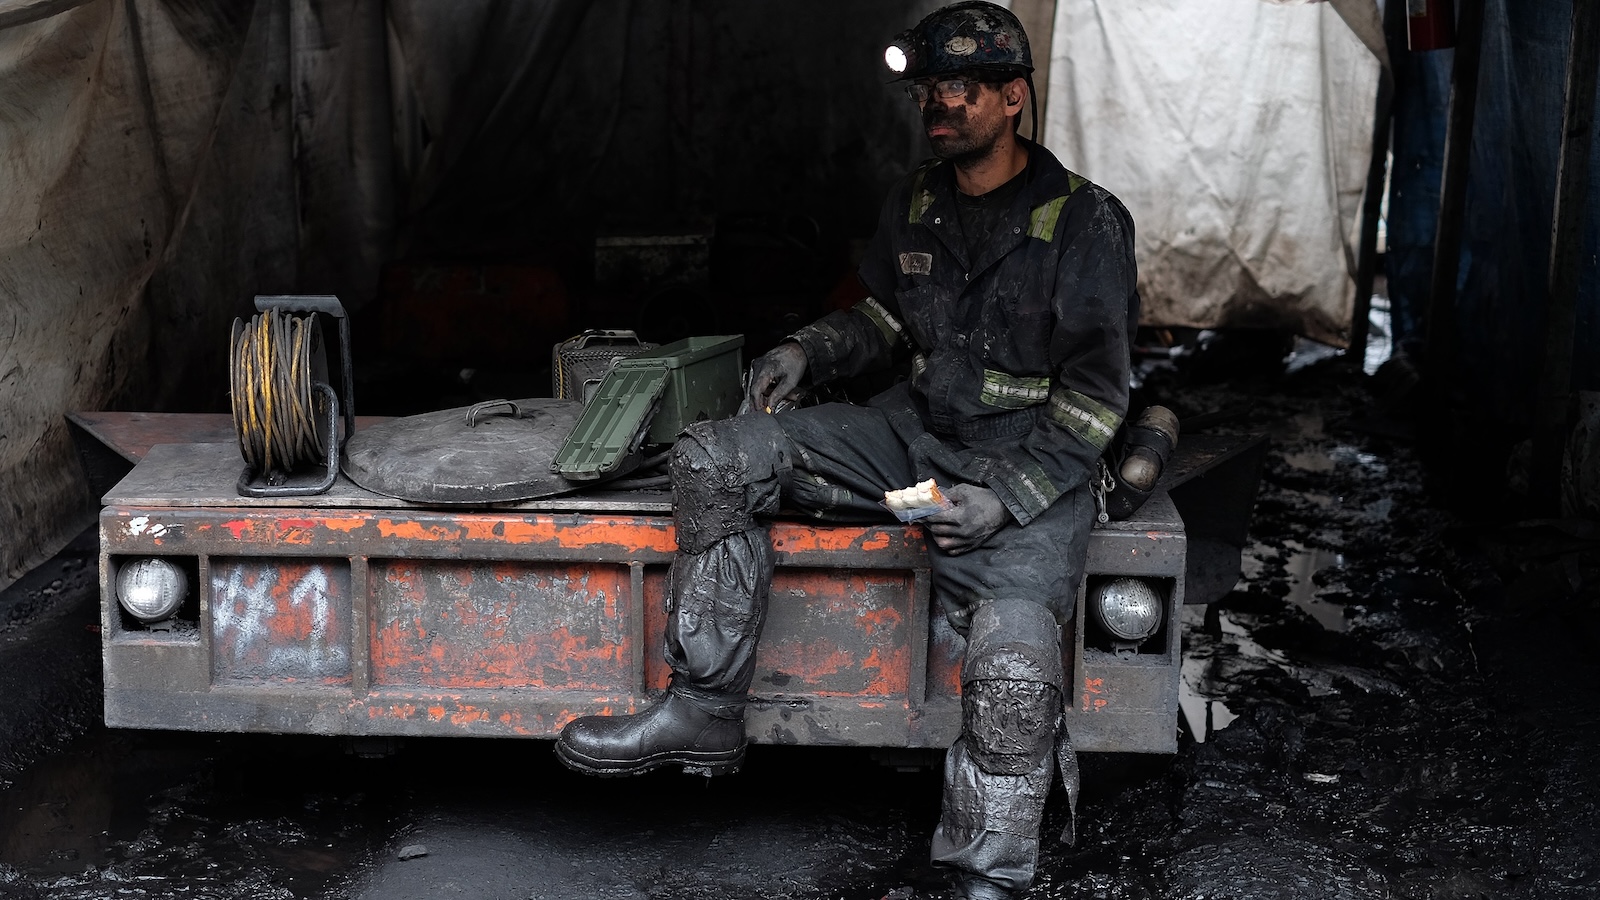 A new federal rule aims to protect miners from black lung disease